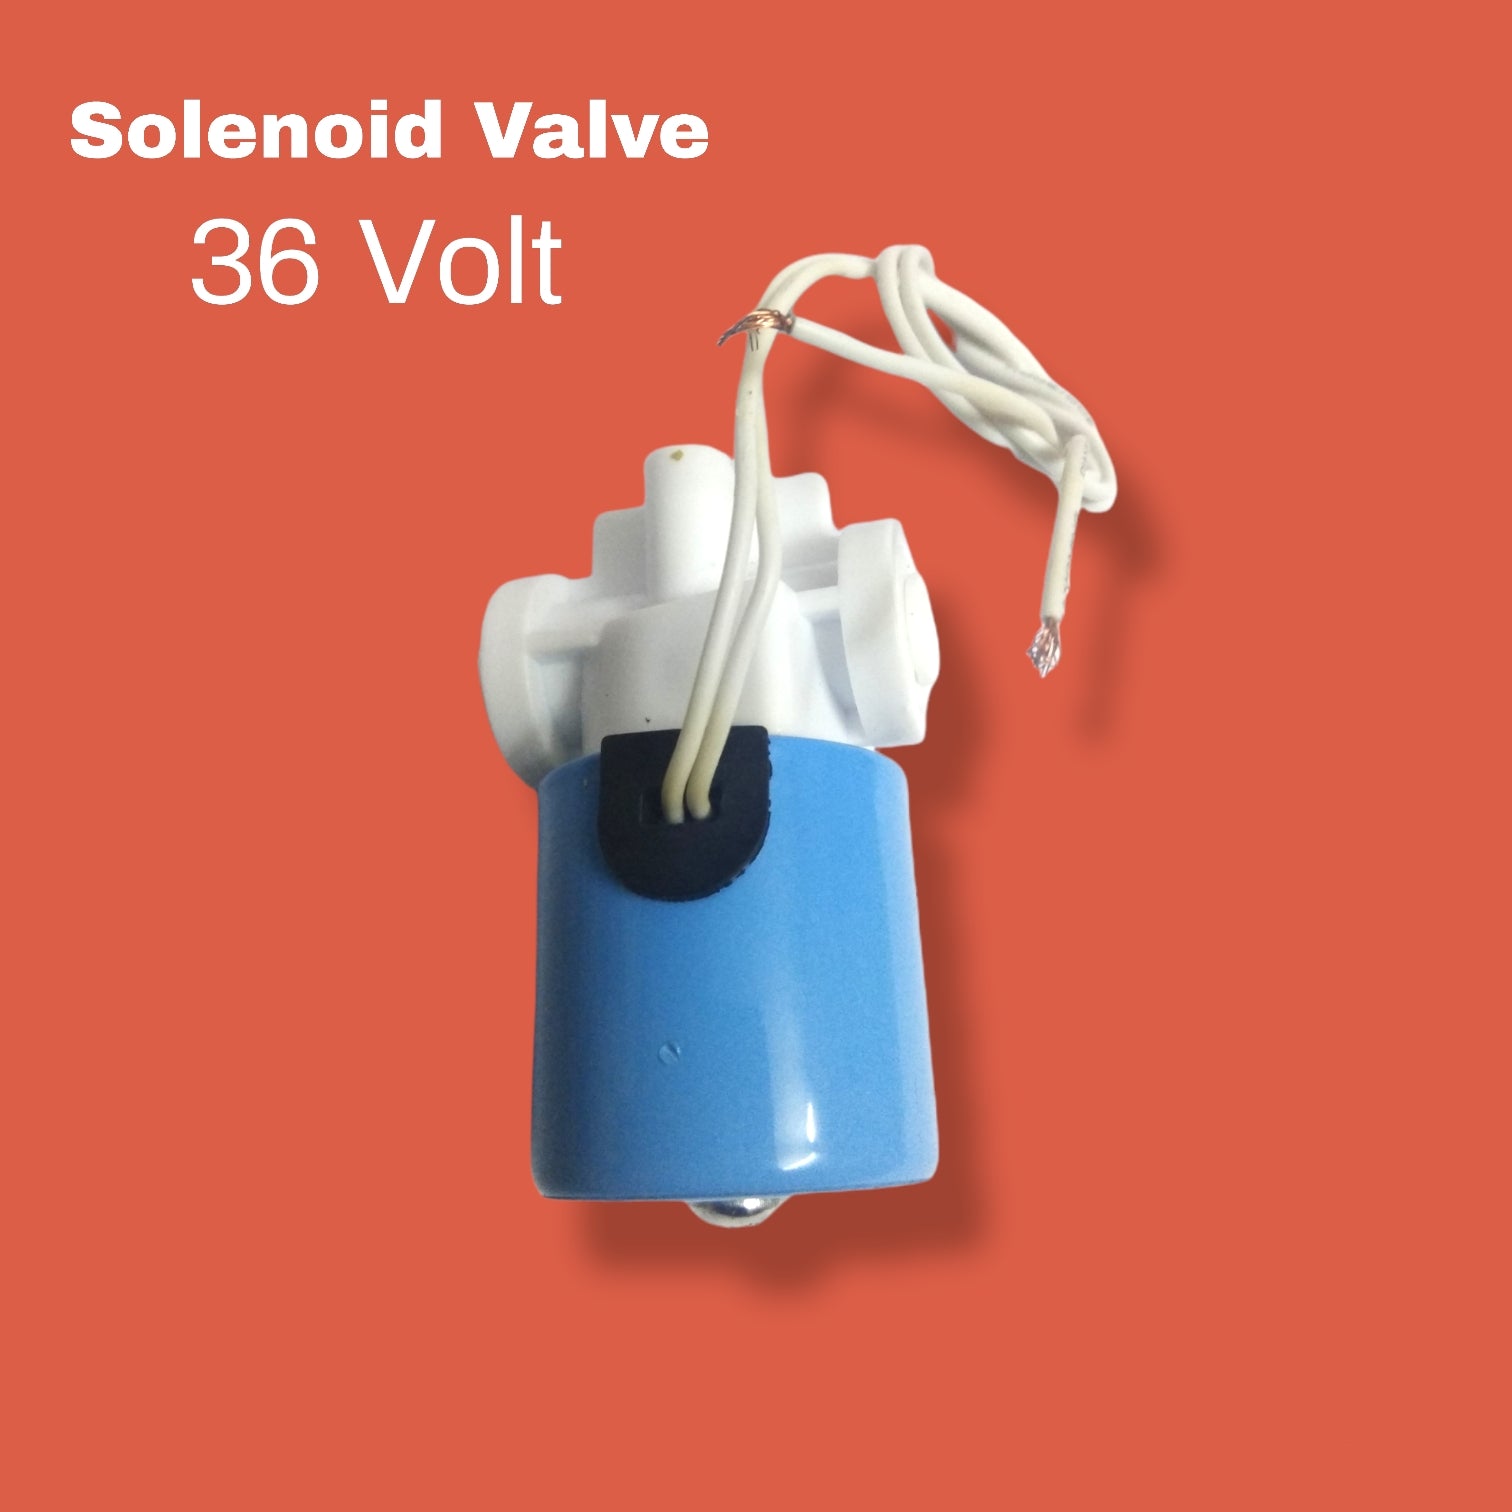 36 Volt DC Solenoid Valve suitable for Domestic RO System. - Faritha